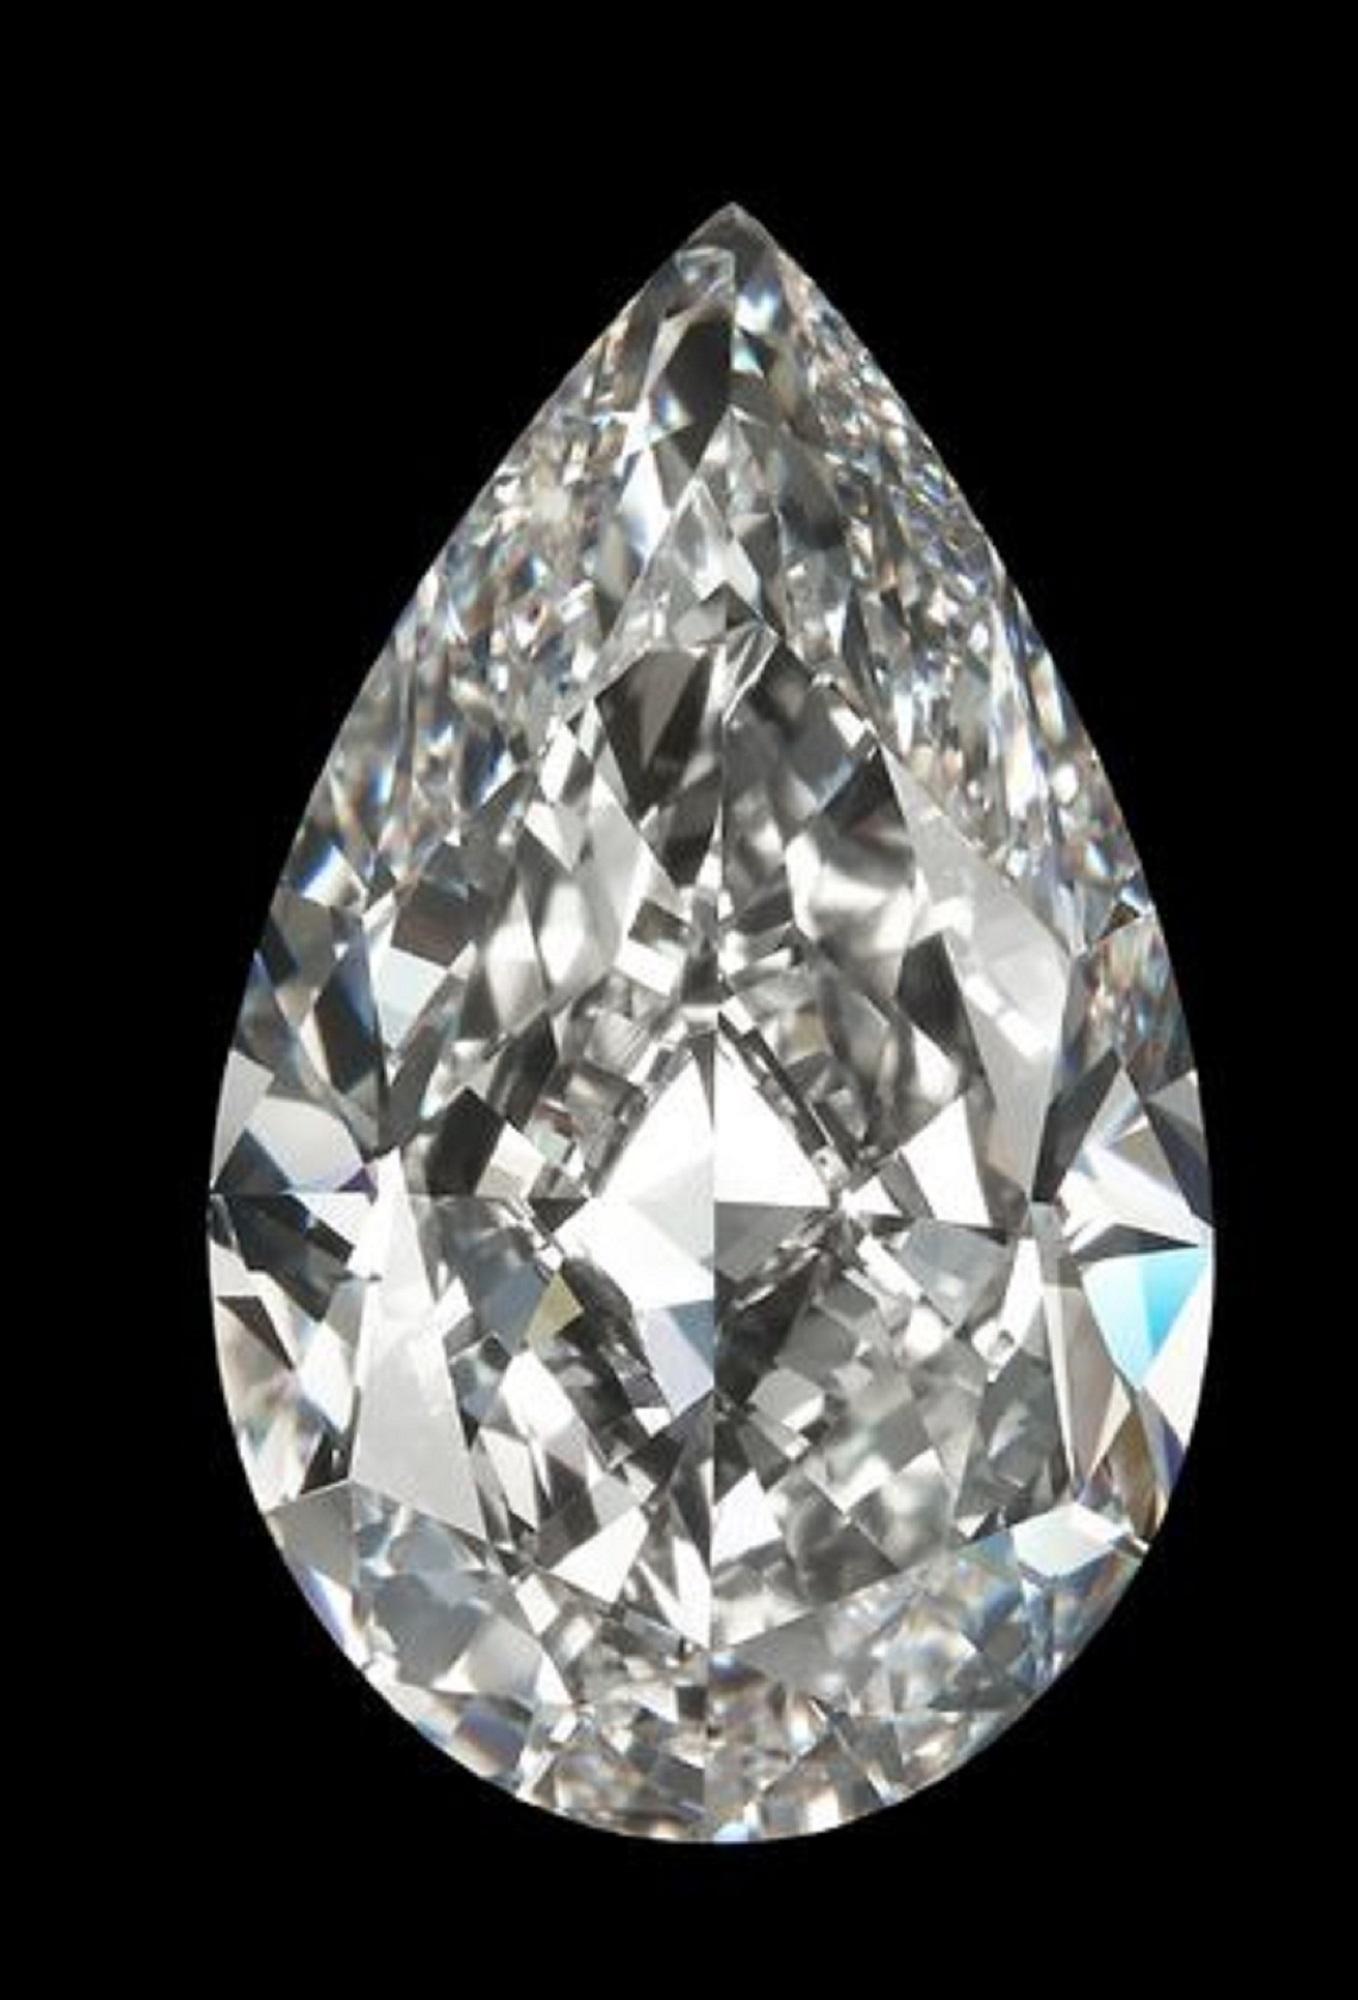 Very rare stone, over 10 carats, color f, flawless clarity.
Possibility to request customized mounting handmade in Italy